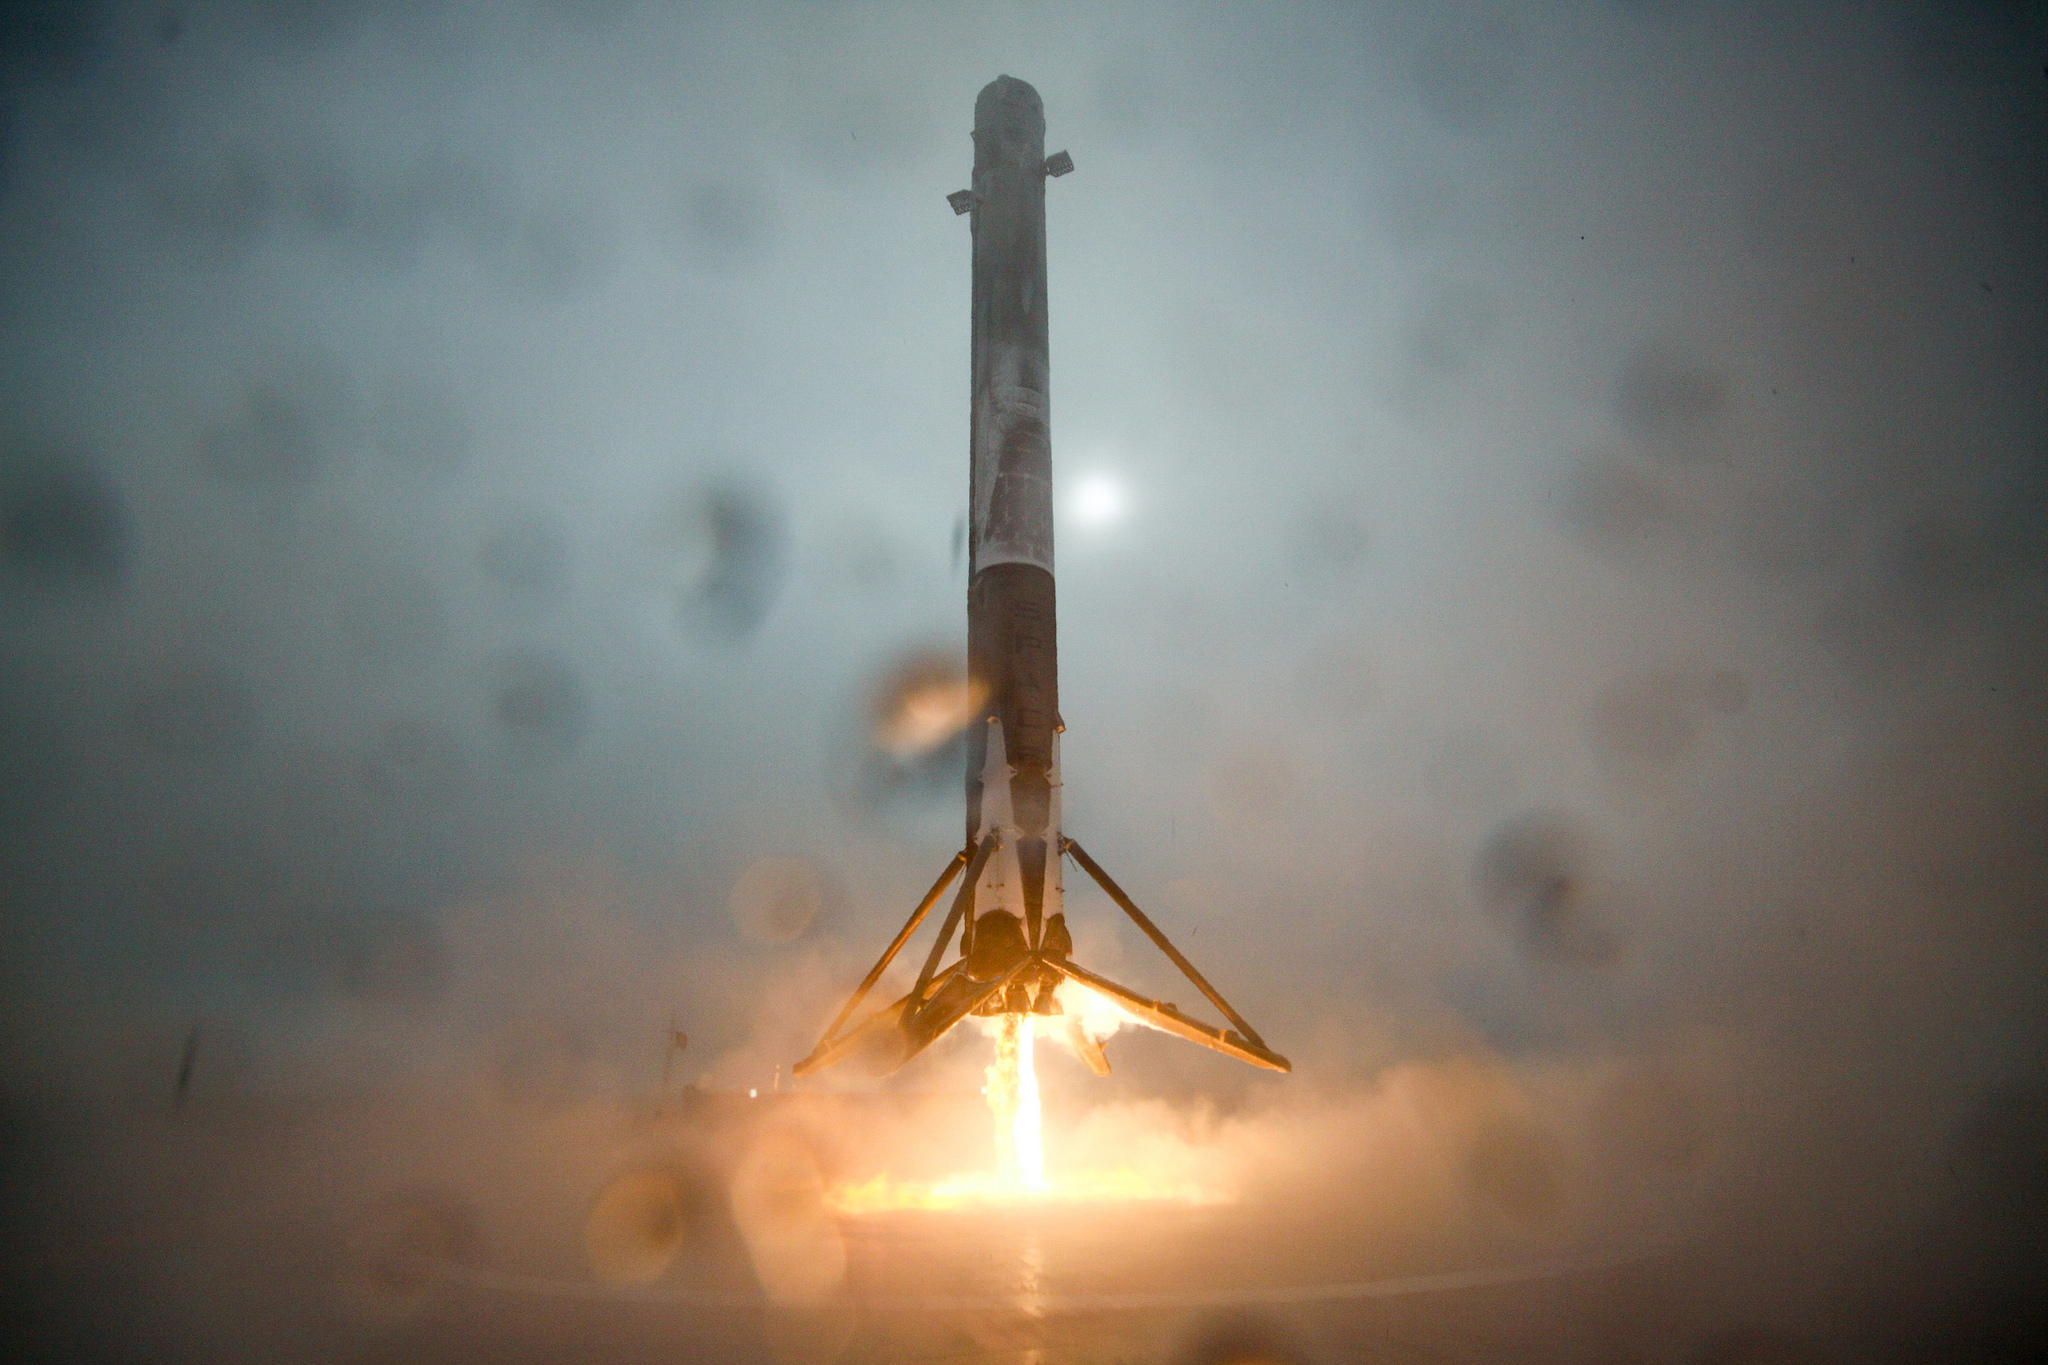 Here’s The Behind-The-Scenes Story Of SpaceX’s Rocket Launch And Landing Attempt